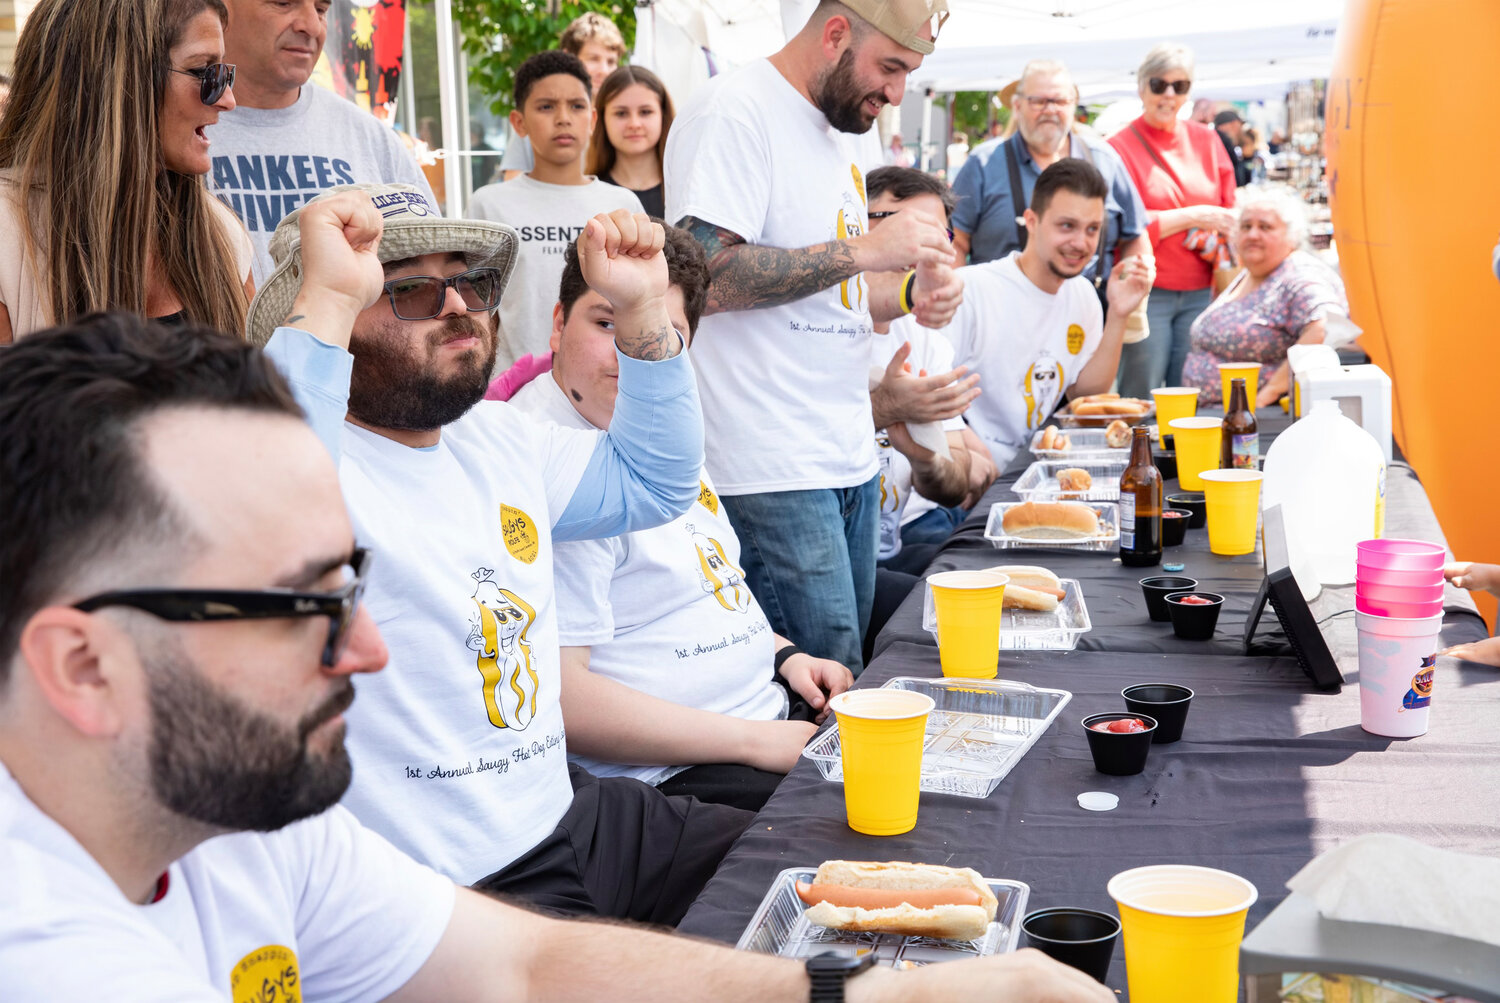 Saugys hosted a hot dog-eating contest this spring